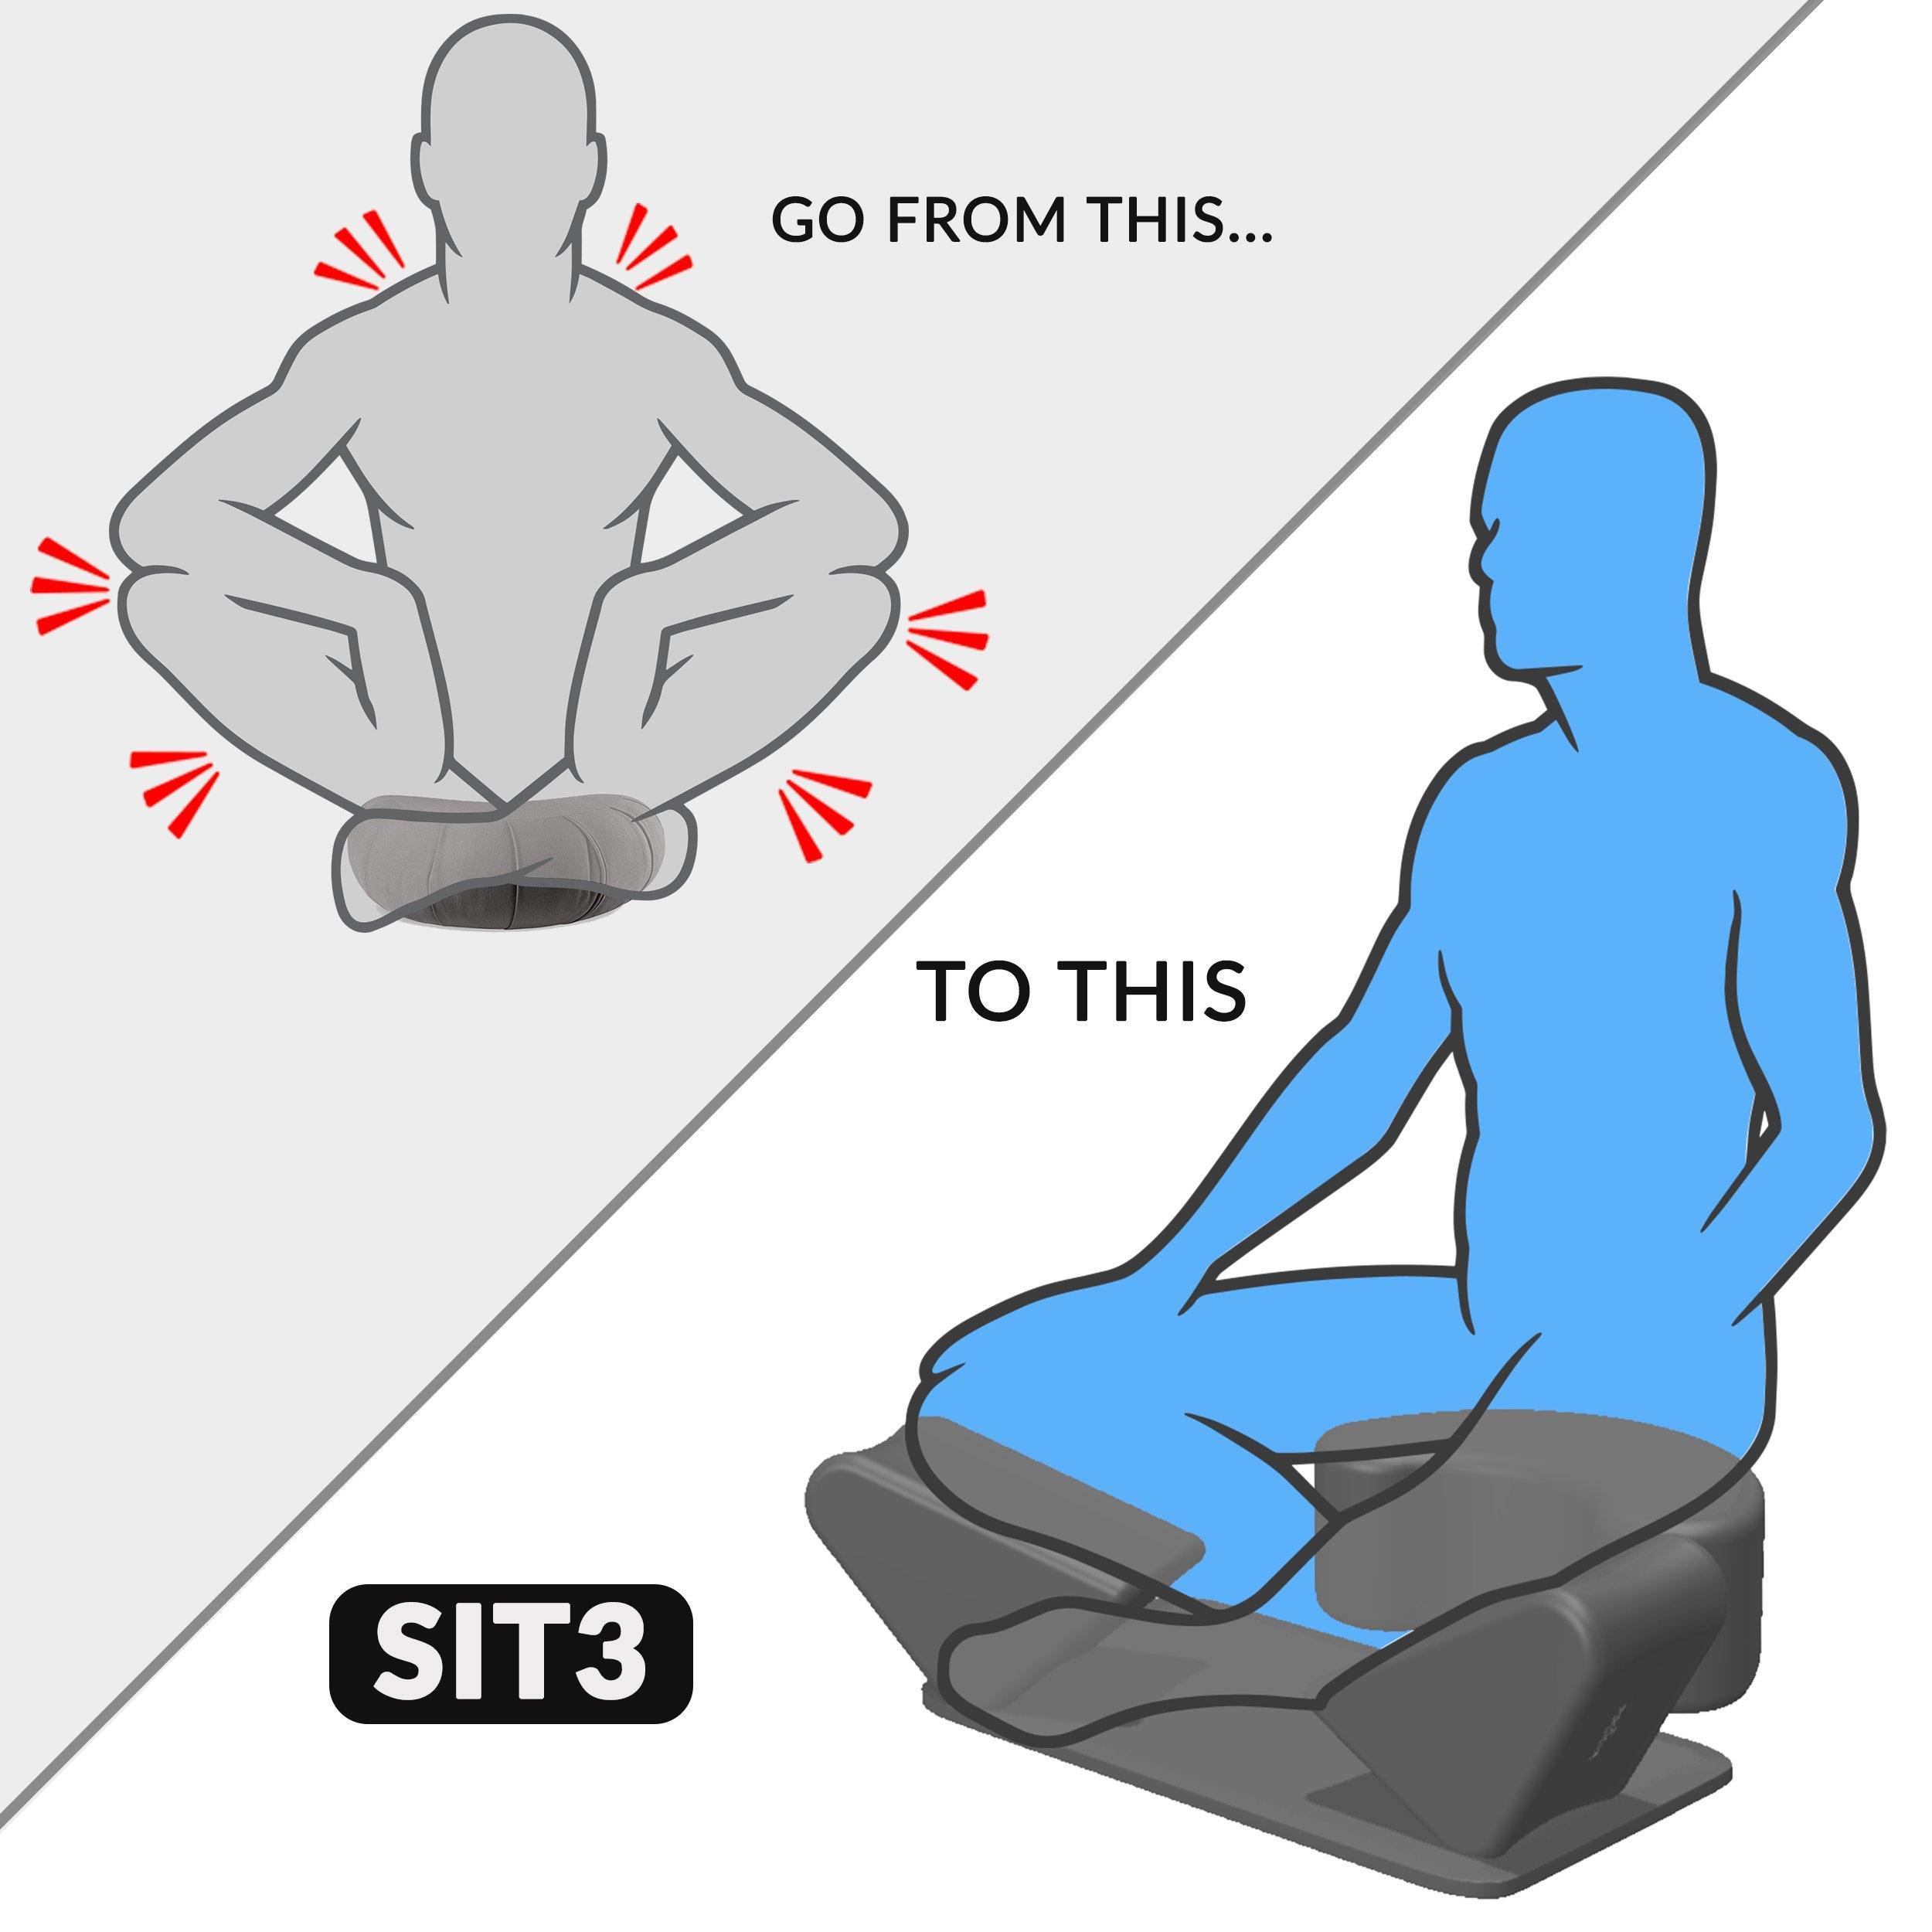 SIT3 Meditation Kit helps relief pressure on the hips, knees, and neck during meditation. 